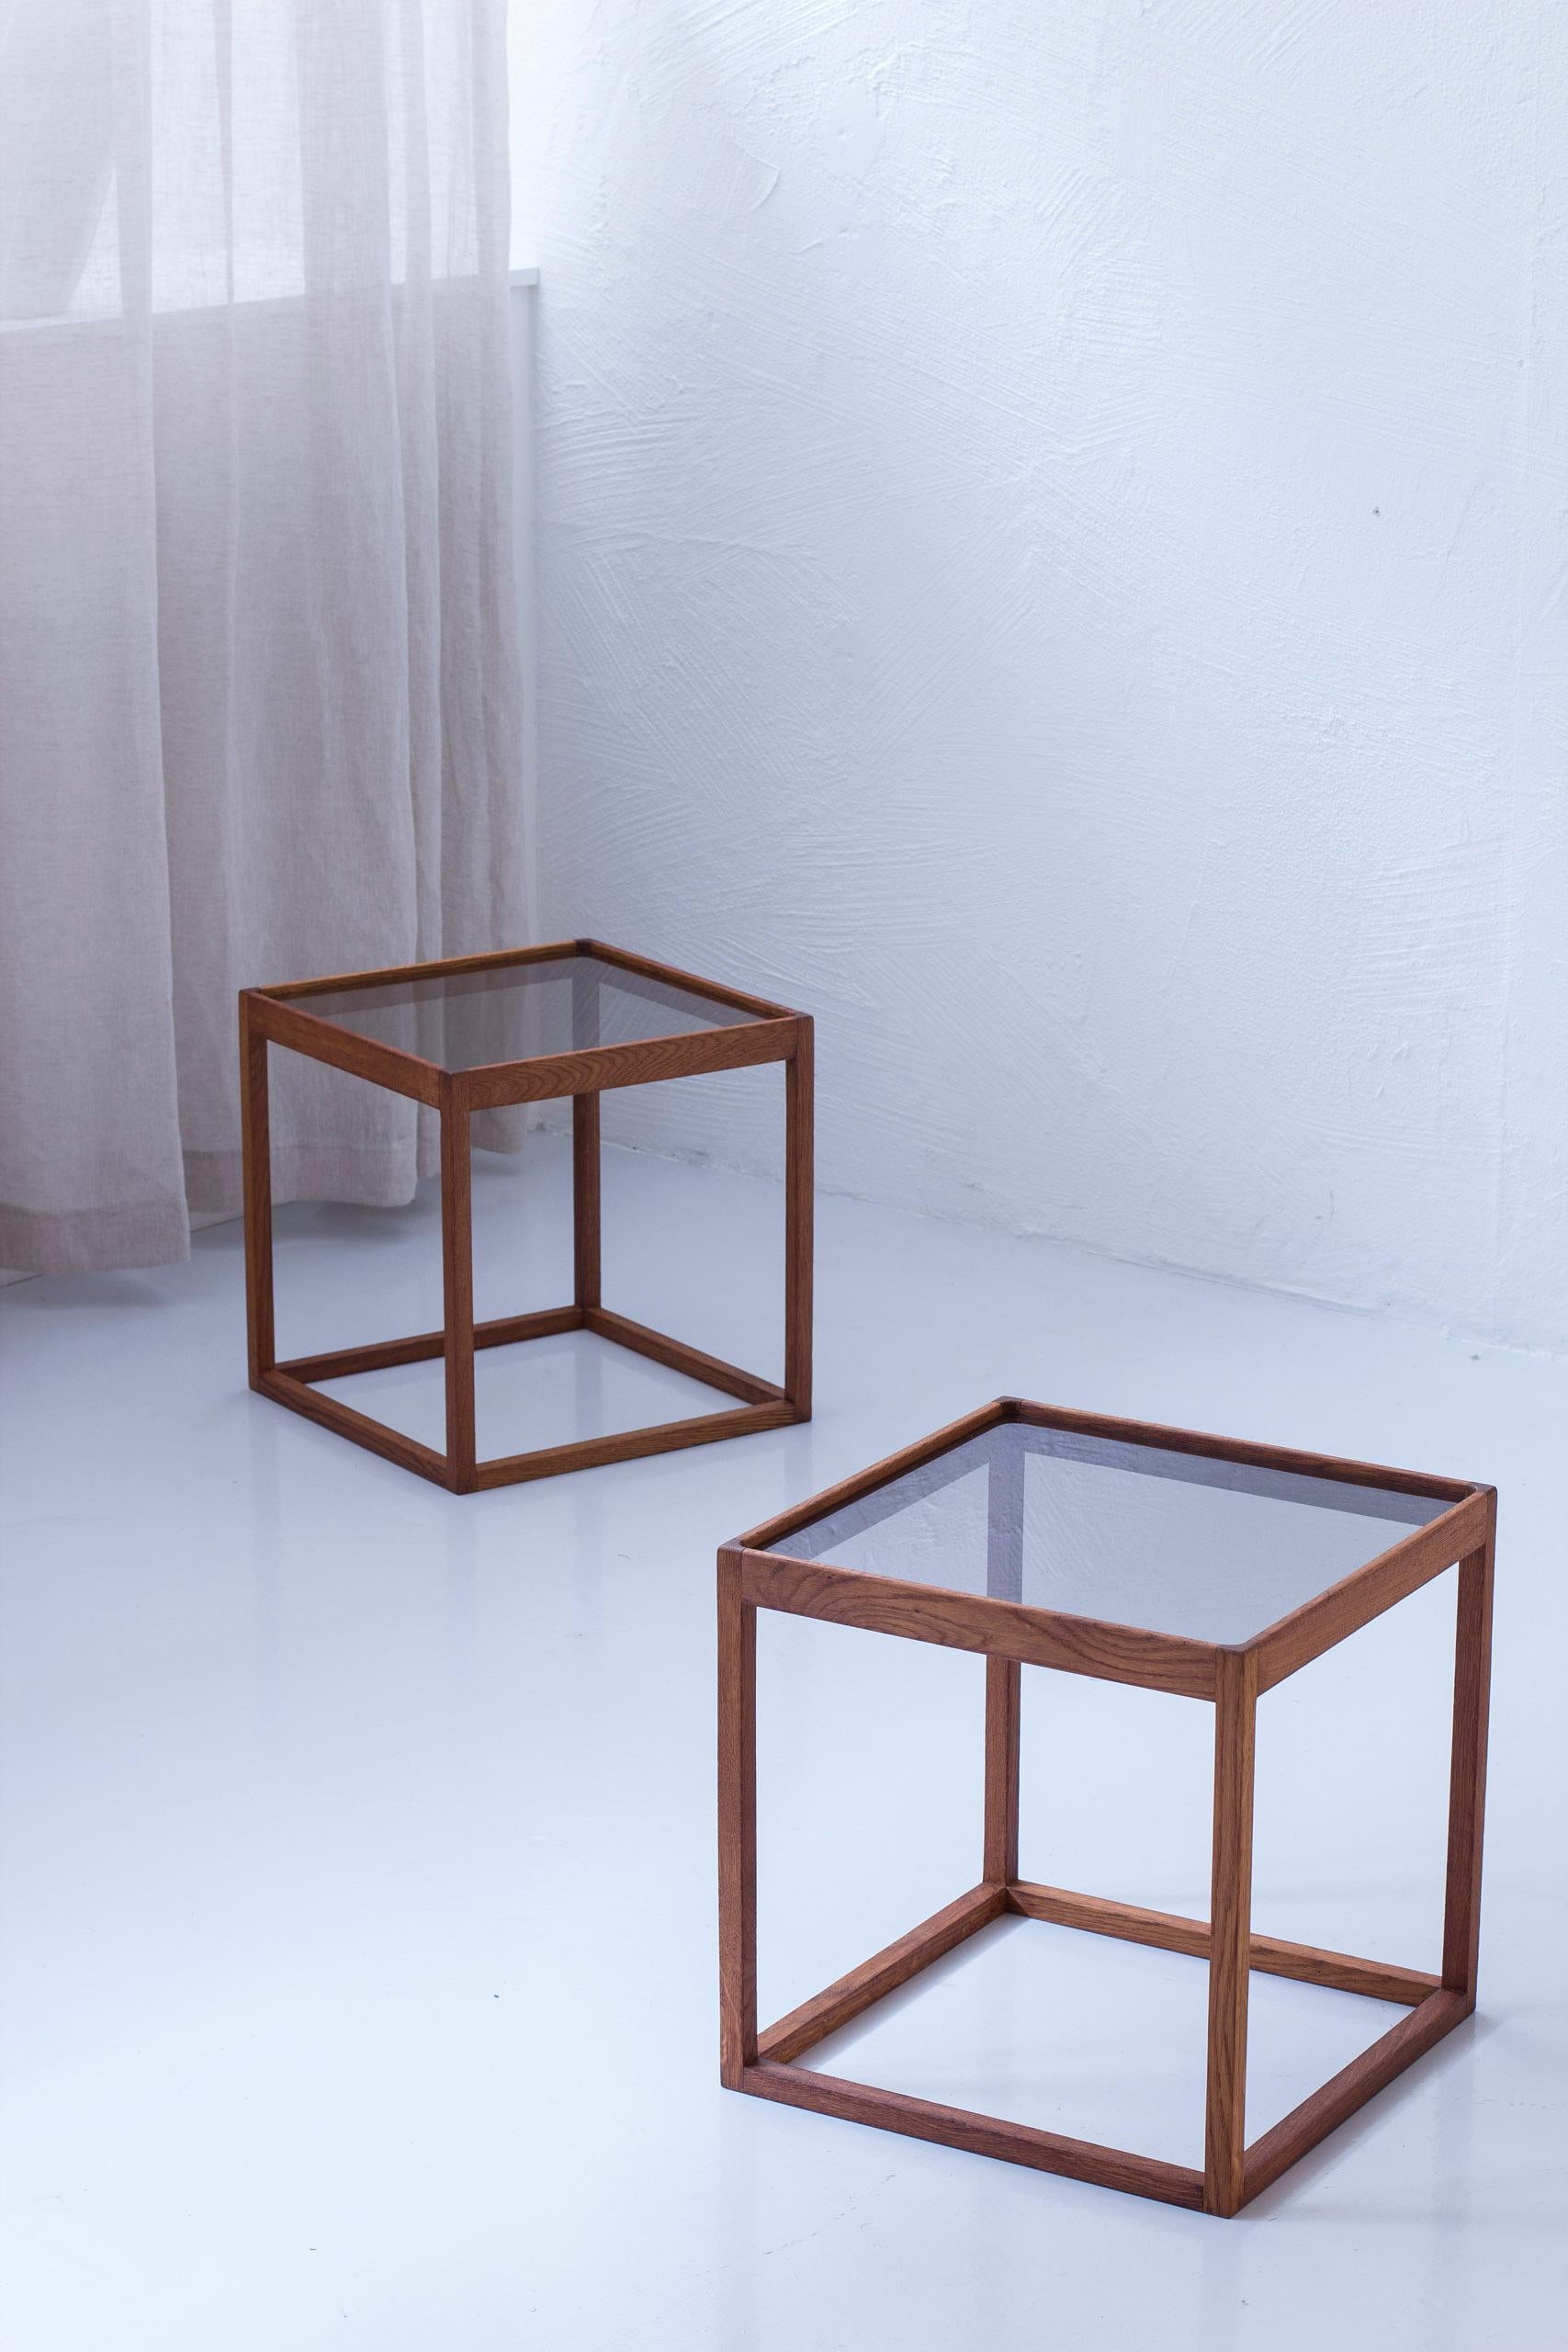 Cube side table designed by Kurt Østervig. produced in Denmark by KP Møbler during the 1960s. Made from solid oak with original smoke colored glass tops. Very good vintage condition with light signs of age and wear/patina. 

 

Price for the pair.

